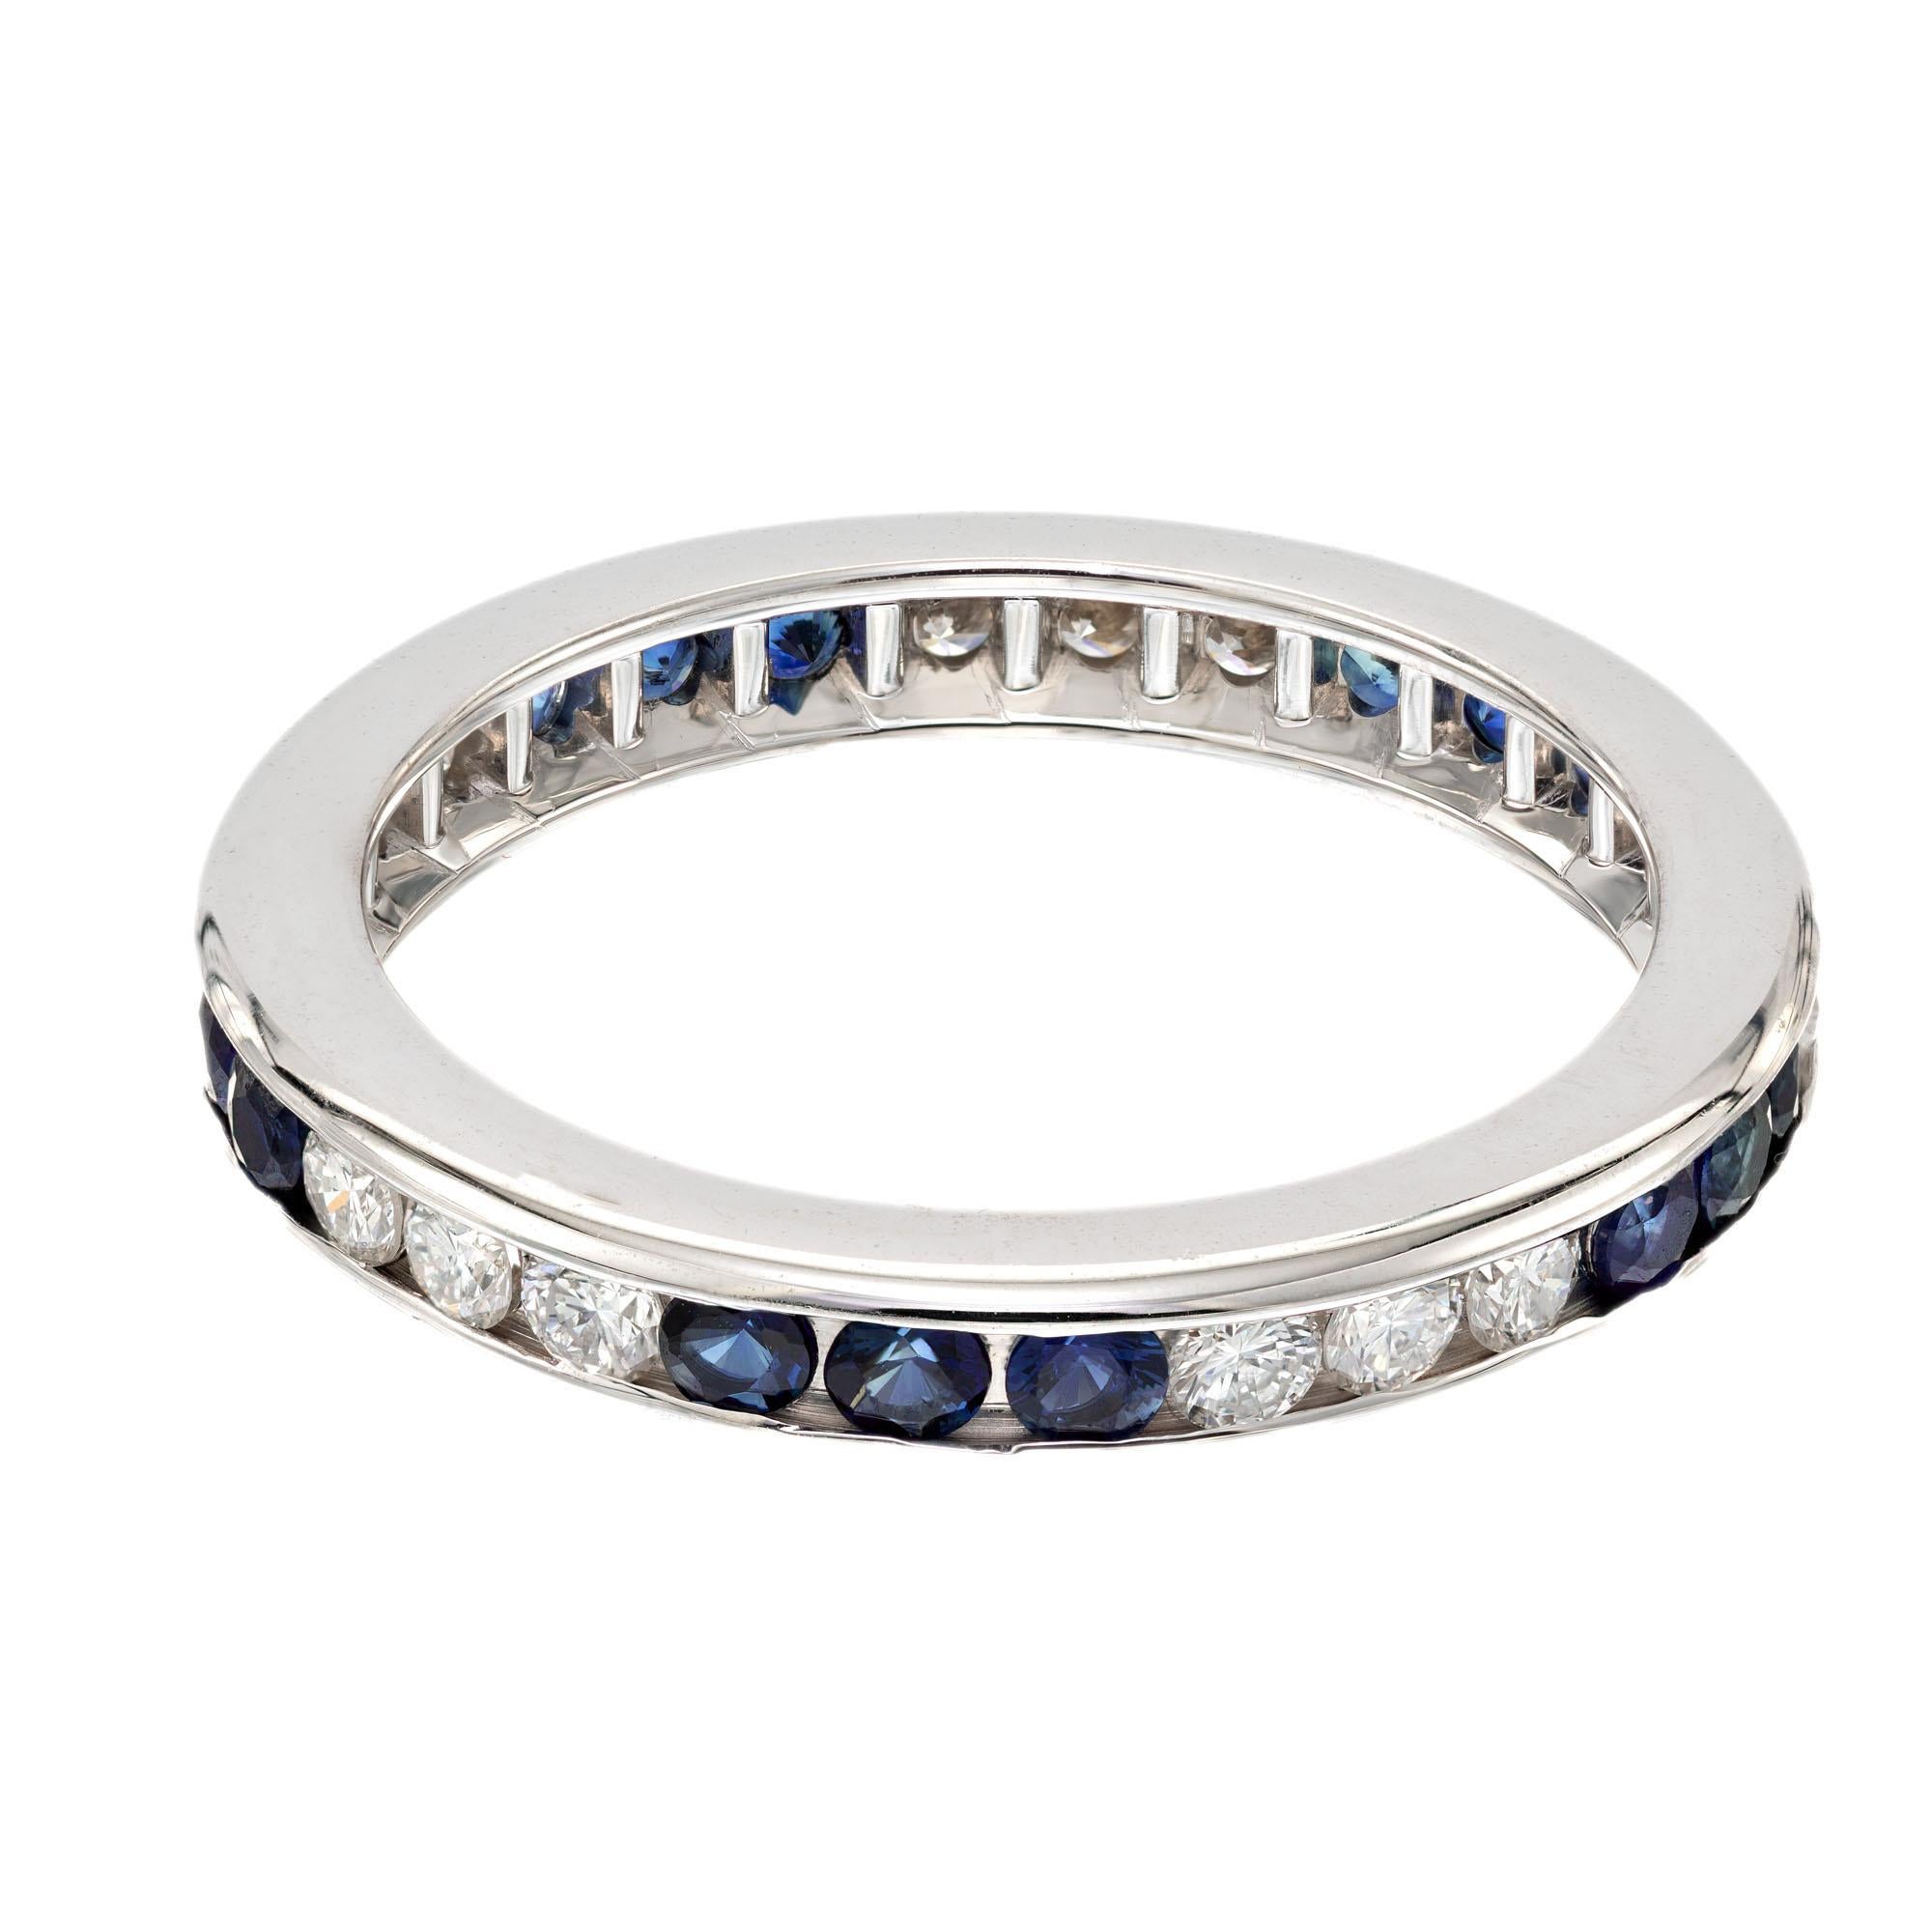 Sapphire and diamond wedding band ring. 15 round diamonds and sapphires, grouped by three, set in a 14k white gold setting. 

15 round diamonds, approx. total weight .53cts  F VS
15 round sapphire approx. total weight .50cts
Size: 6 and